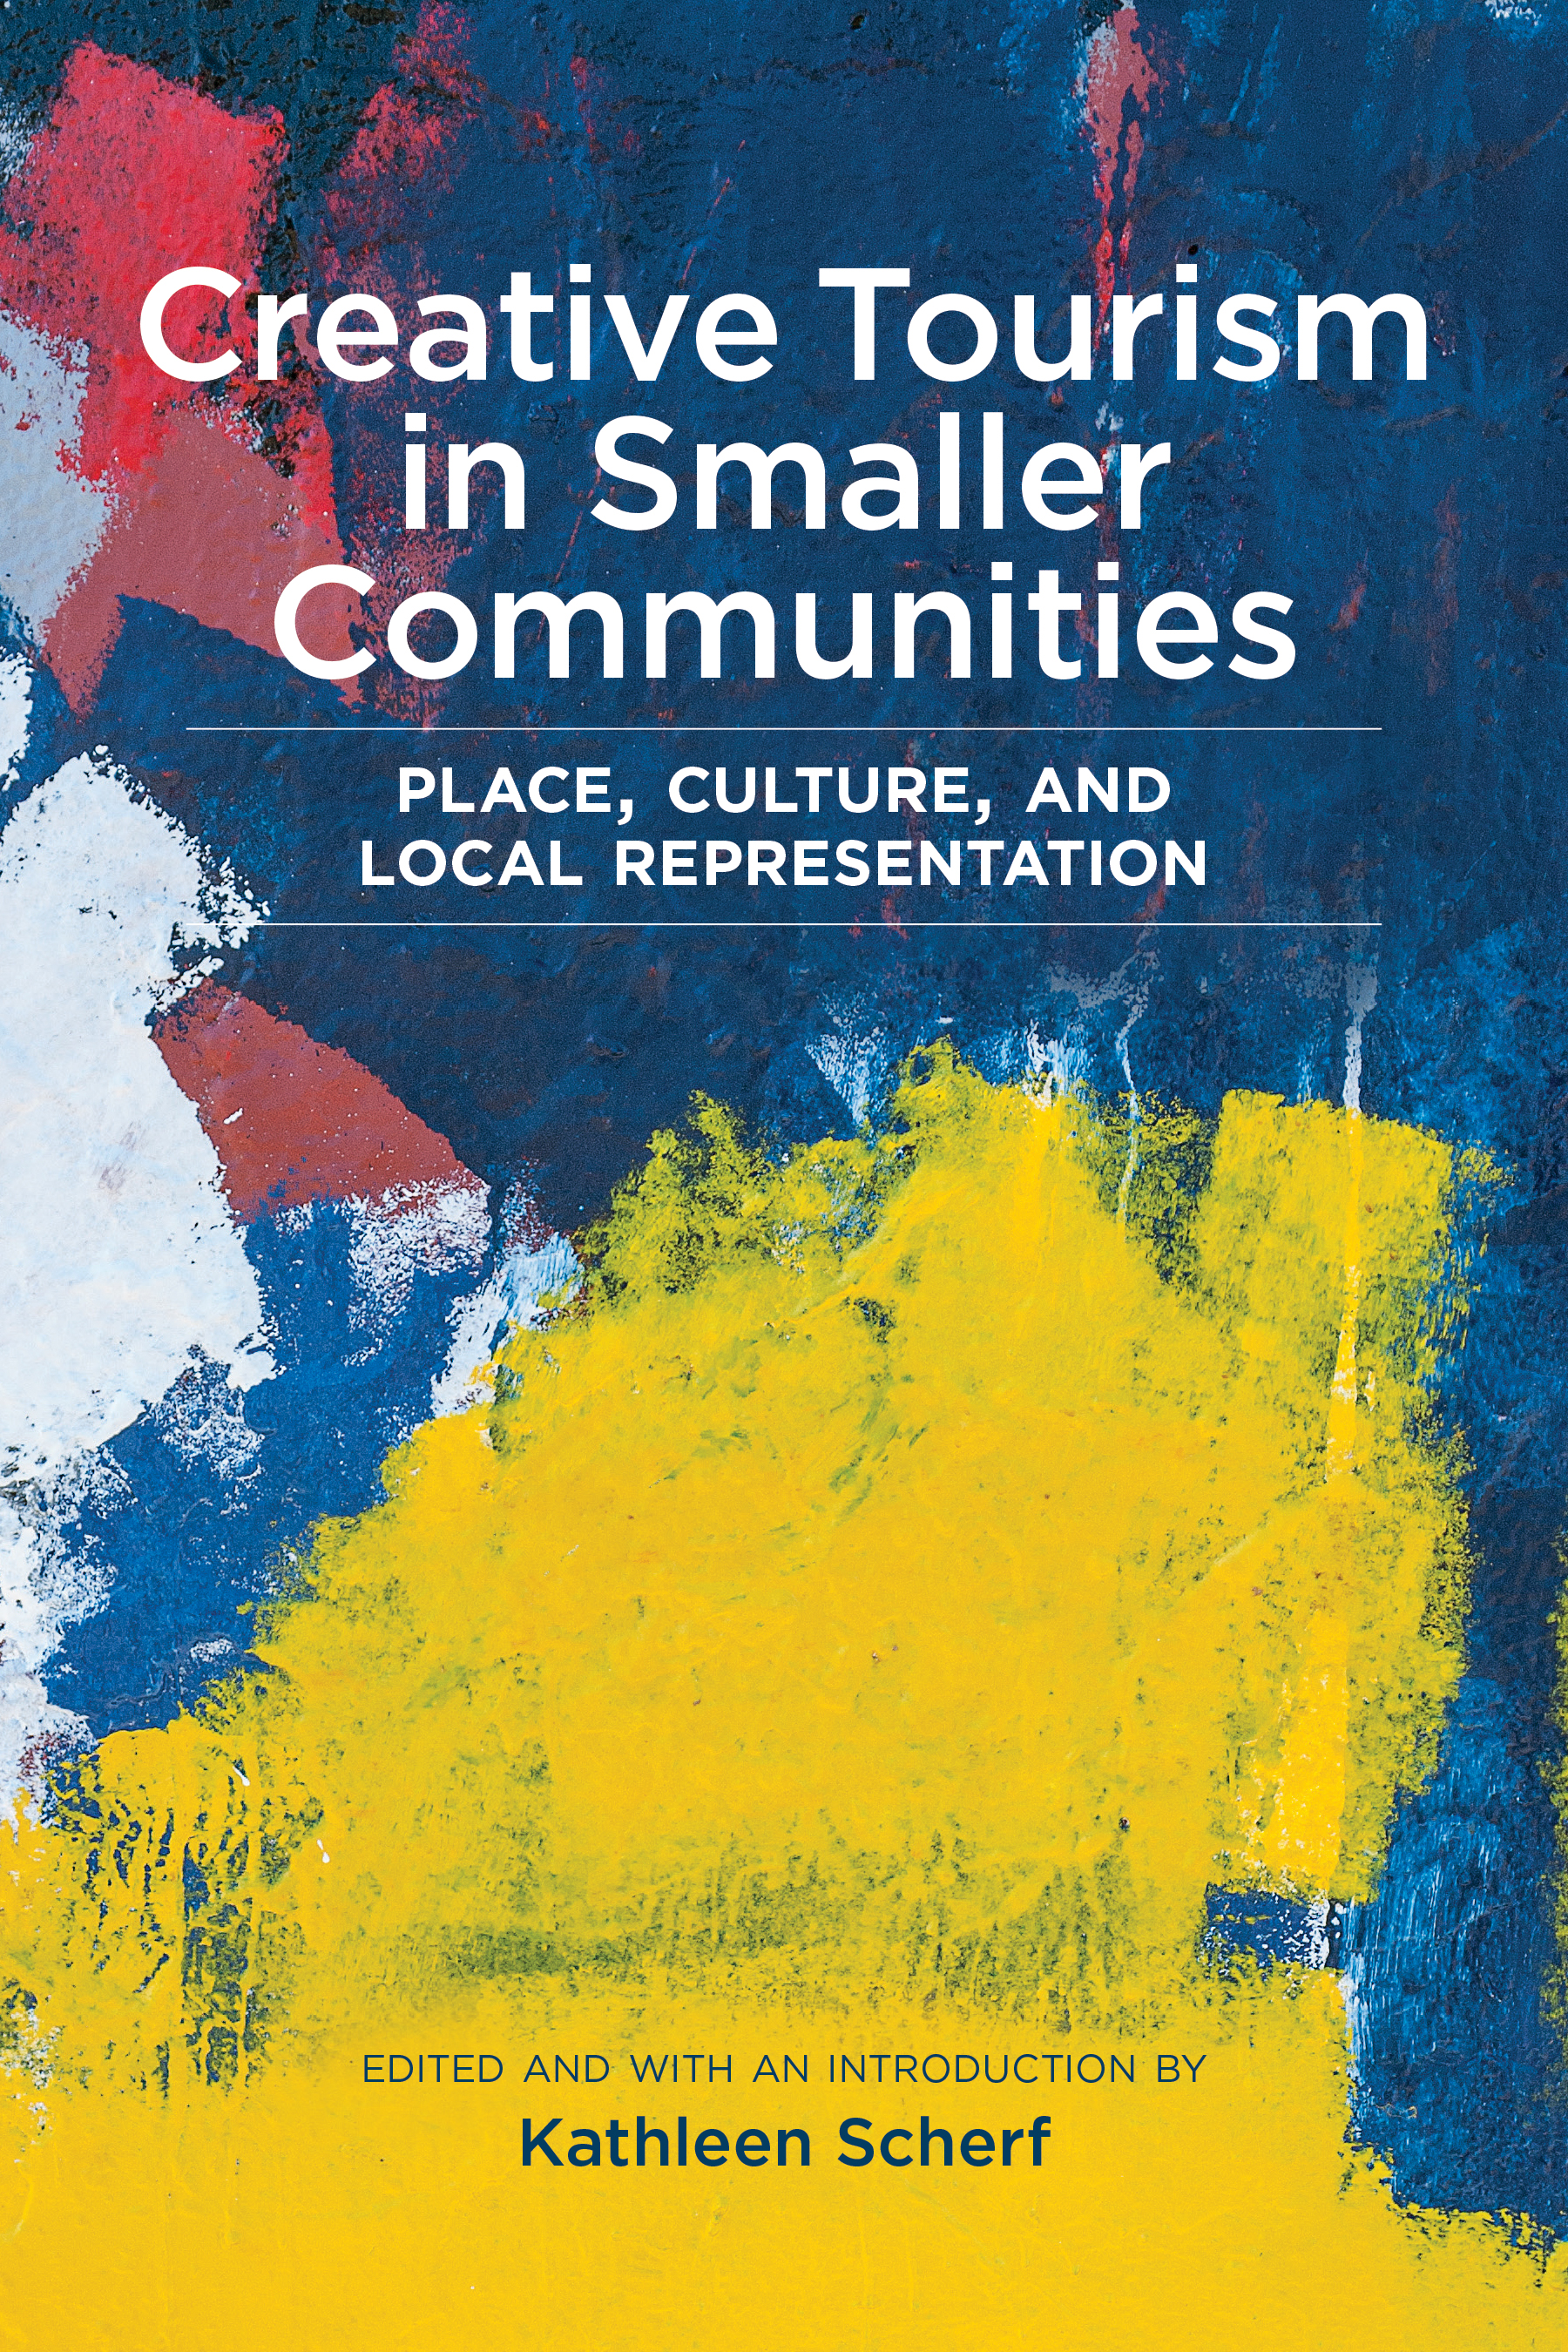 Book Cover Image for: Creative Tourism in Smaller Communities